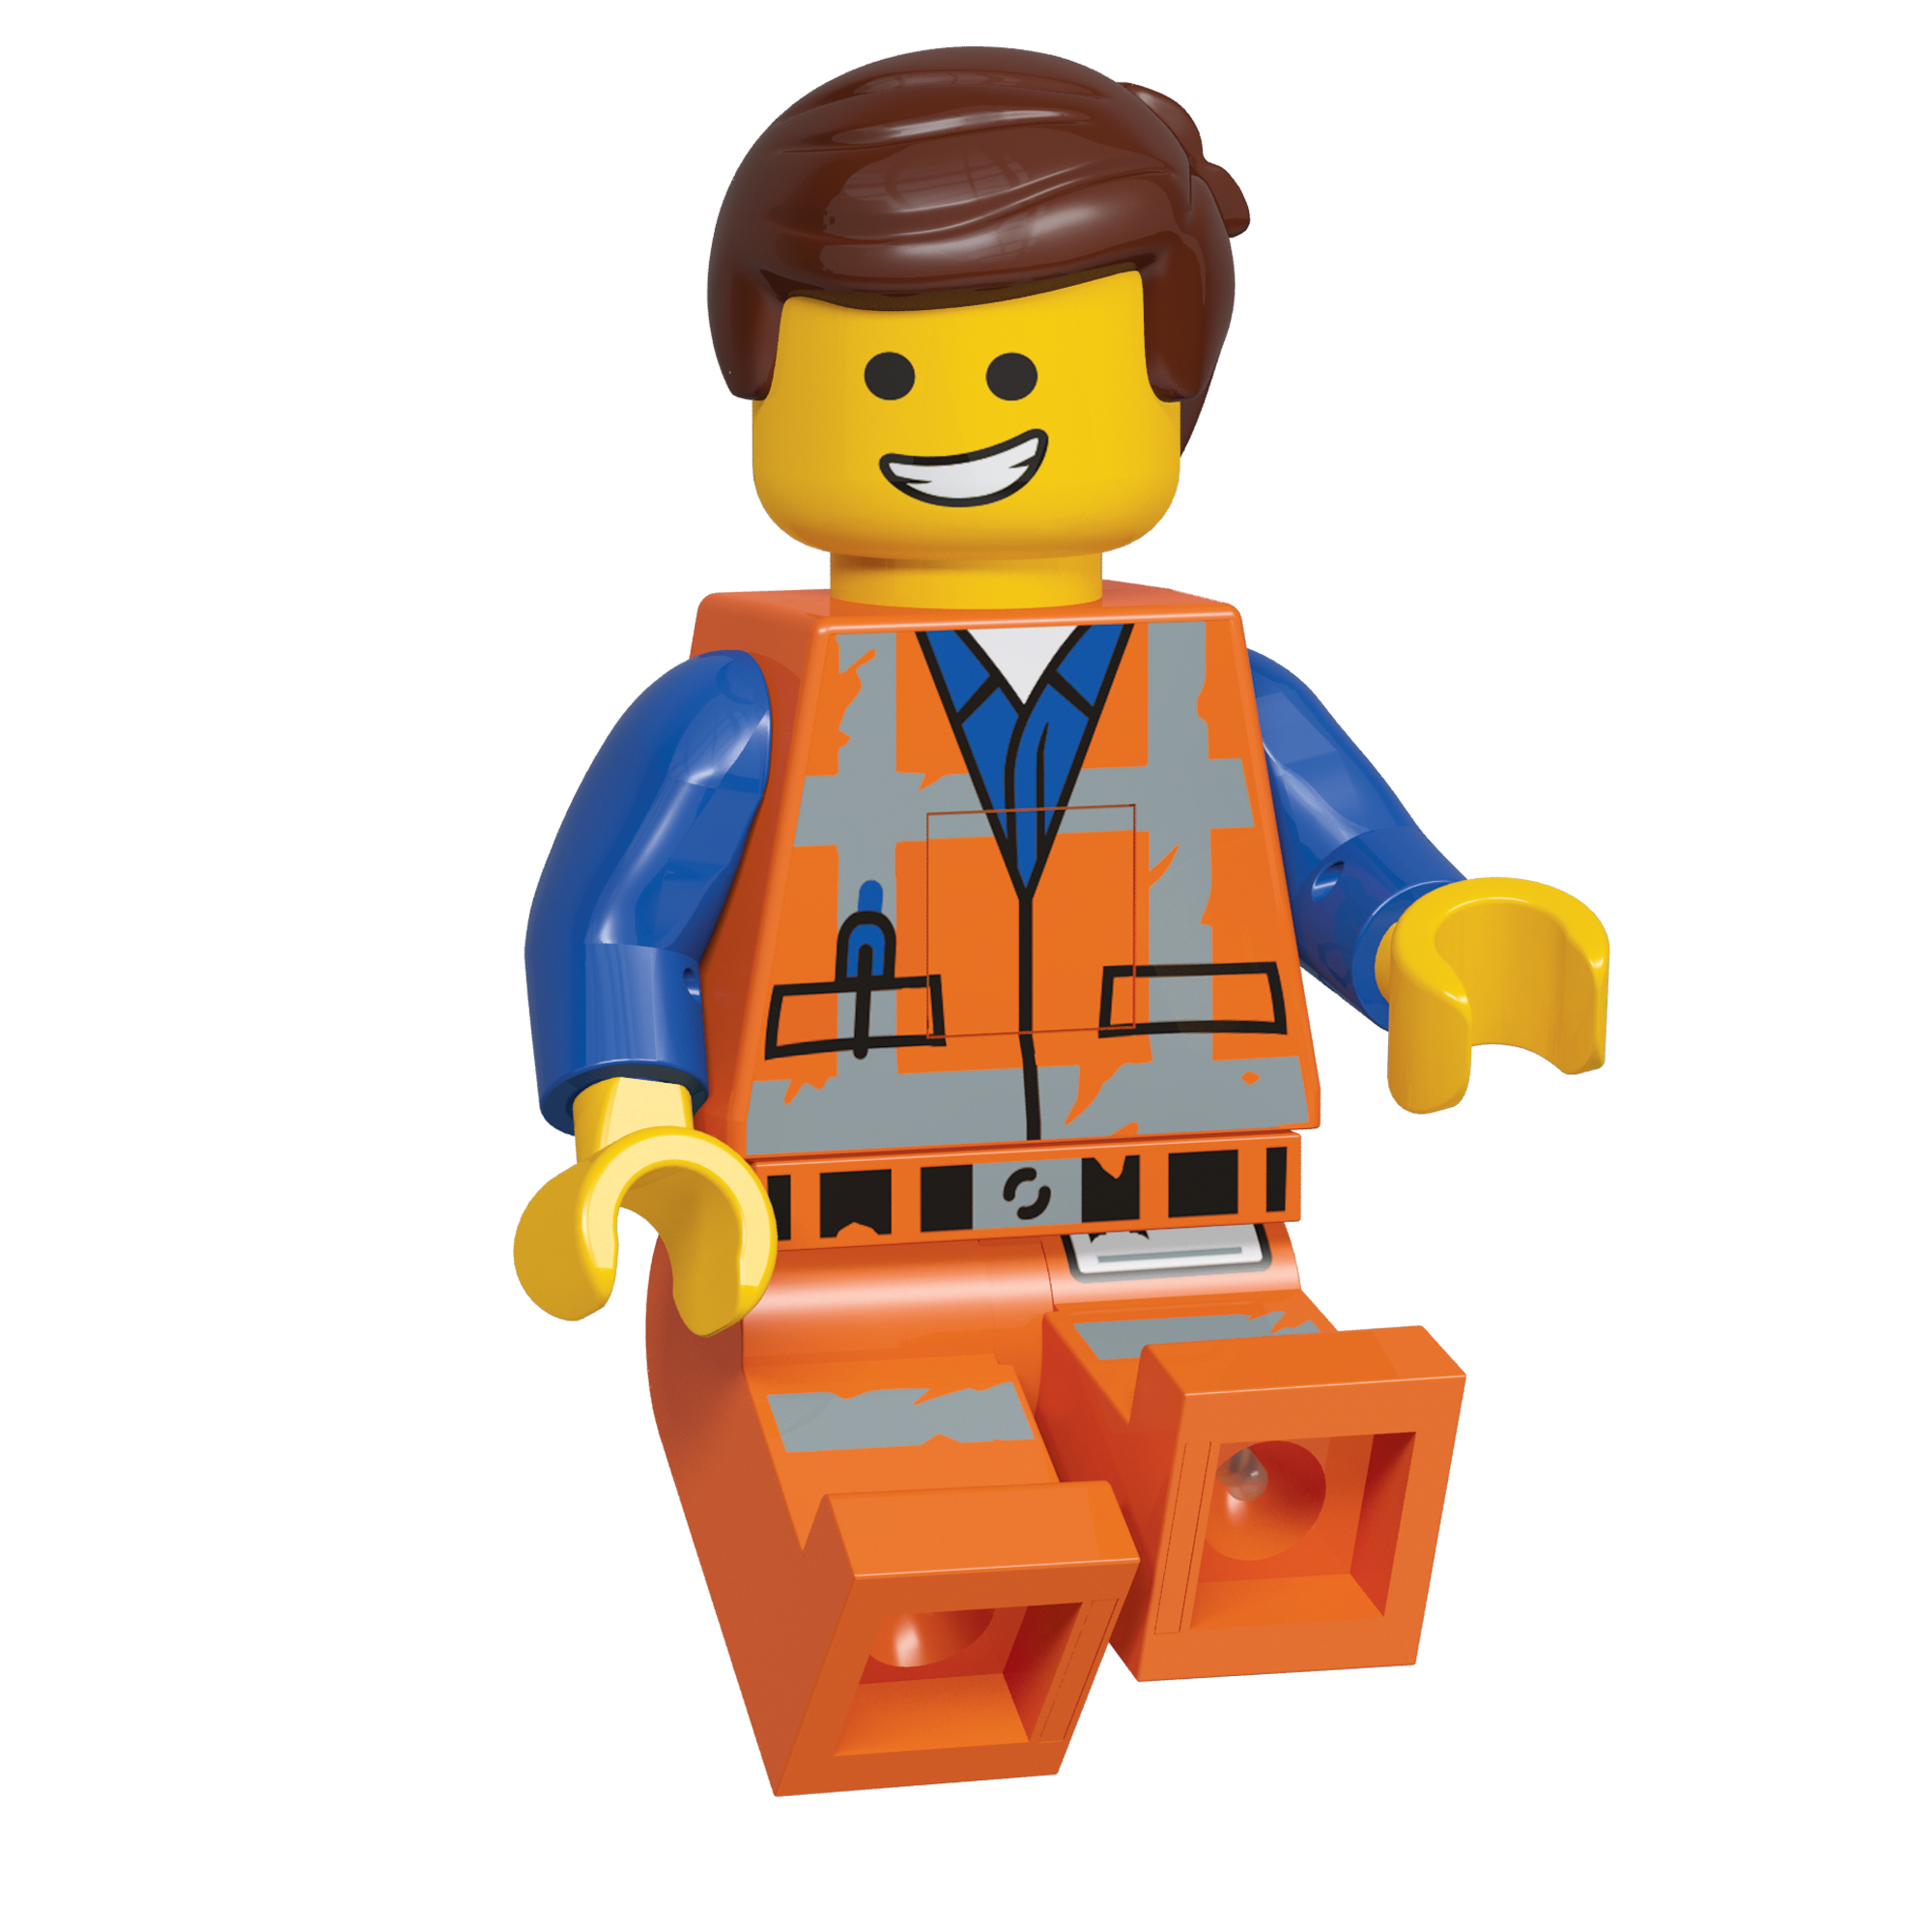 The LEGO Movie 2 Torch, Emmet - image 1 of 3